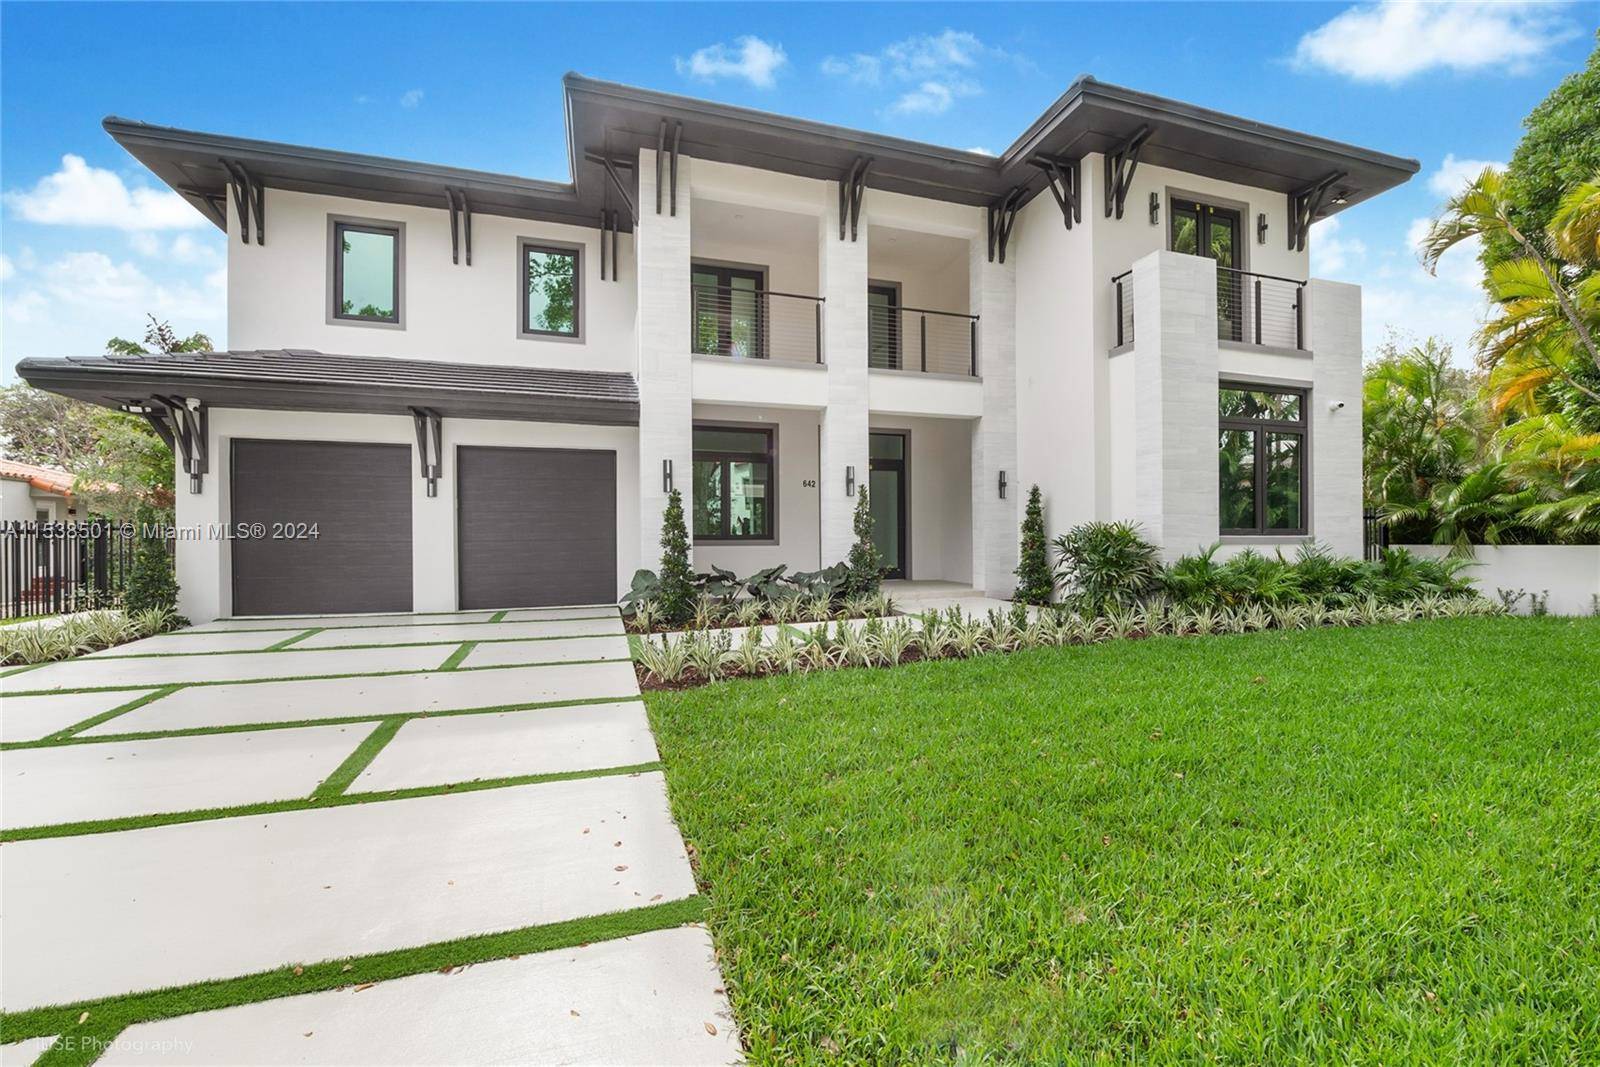 Ready for move in ! Brand new transitional style executive home within walking distance to Granada Golf Course, Coral Gables Country Club, Miracle Mile and Downtown Coral Gables.